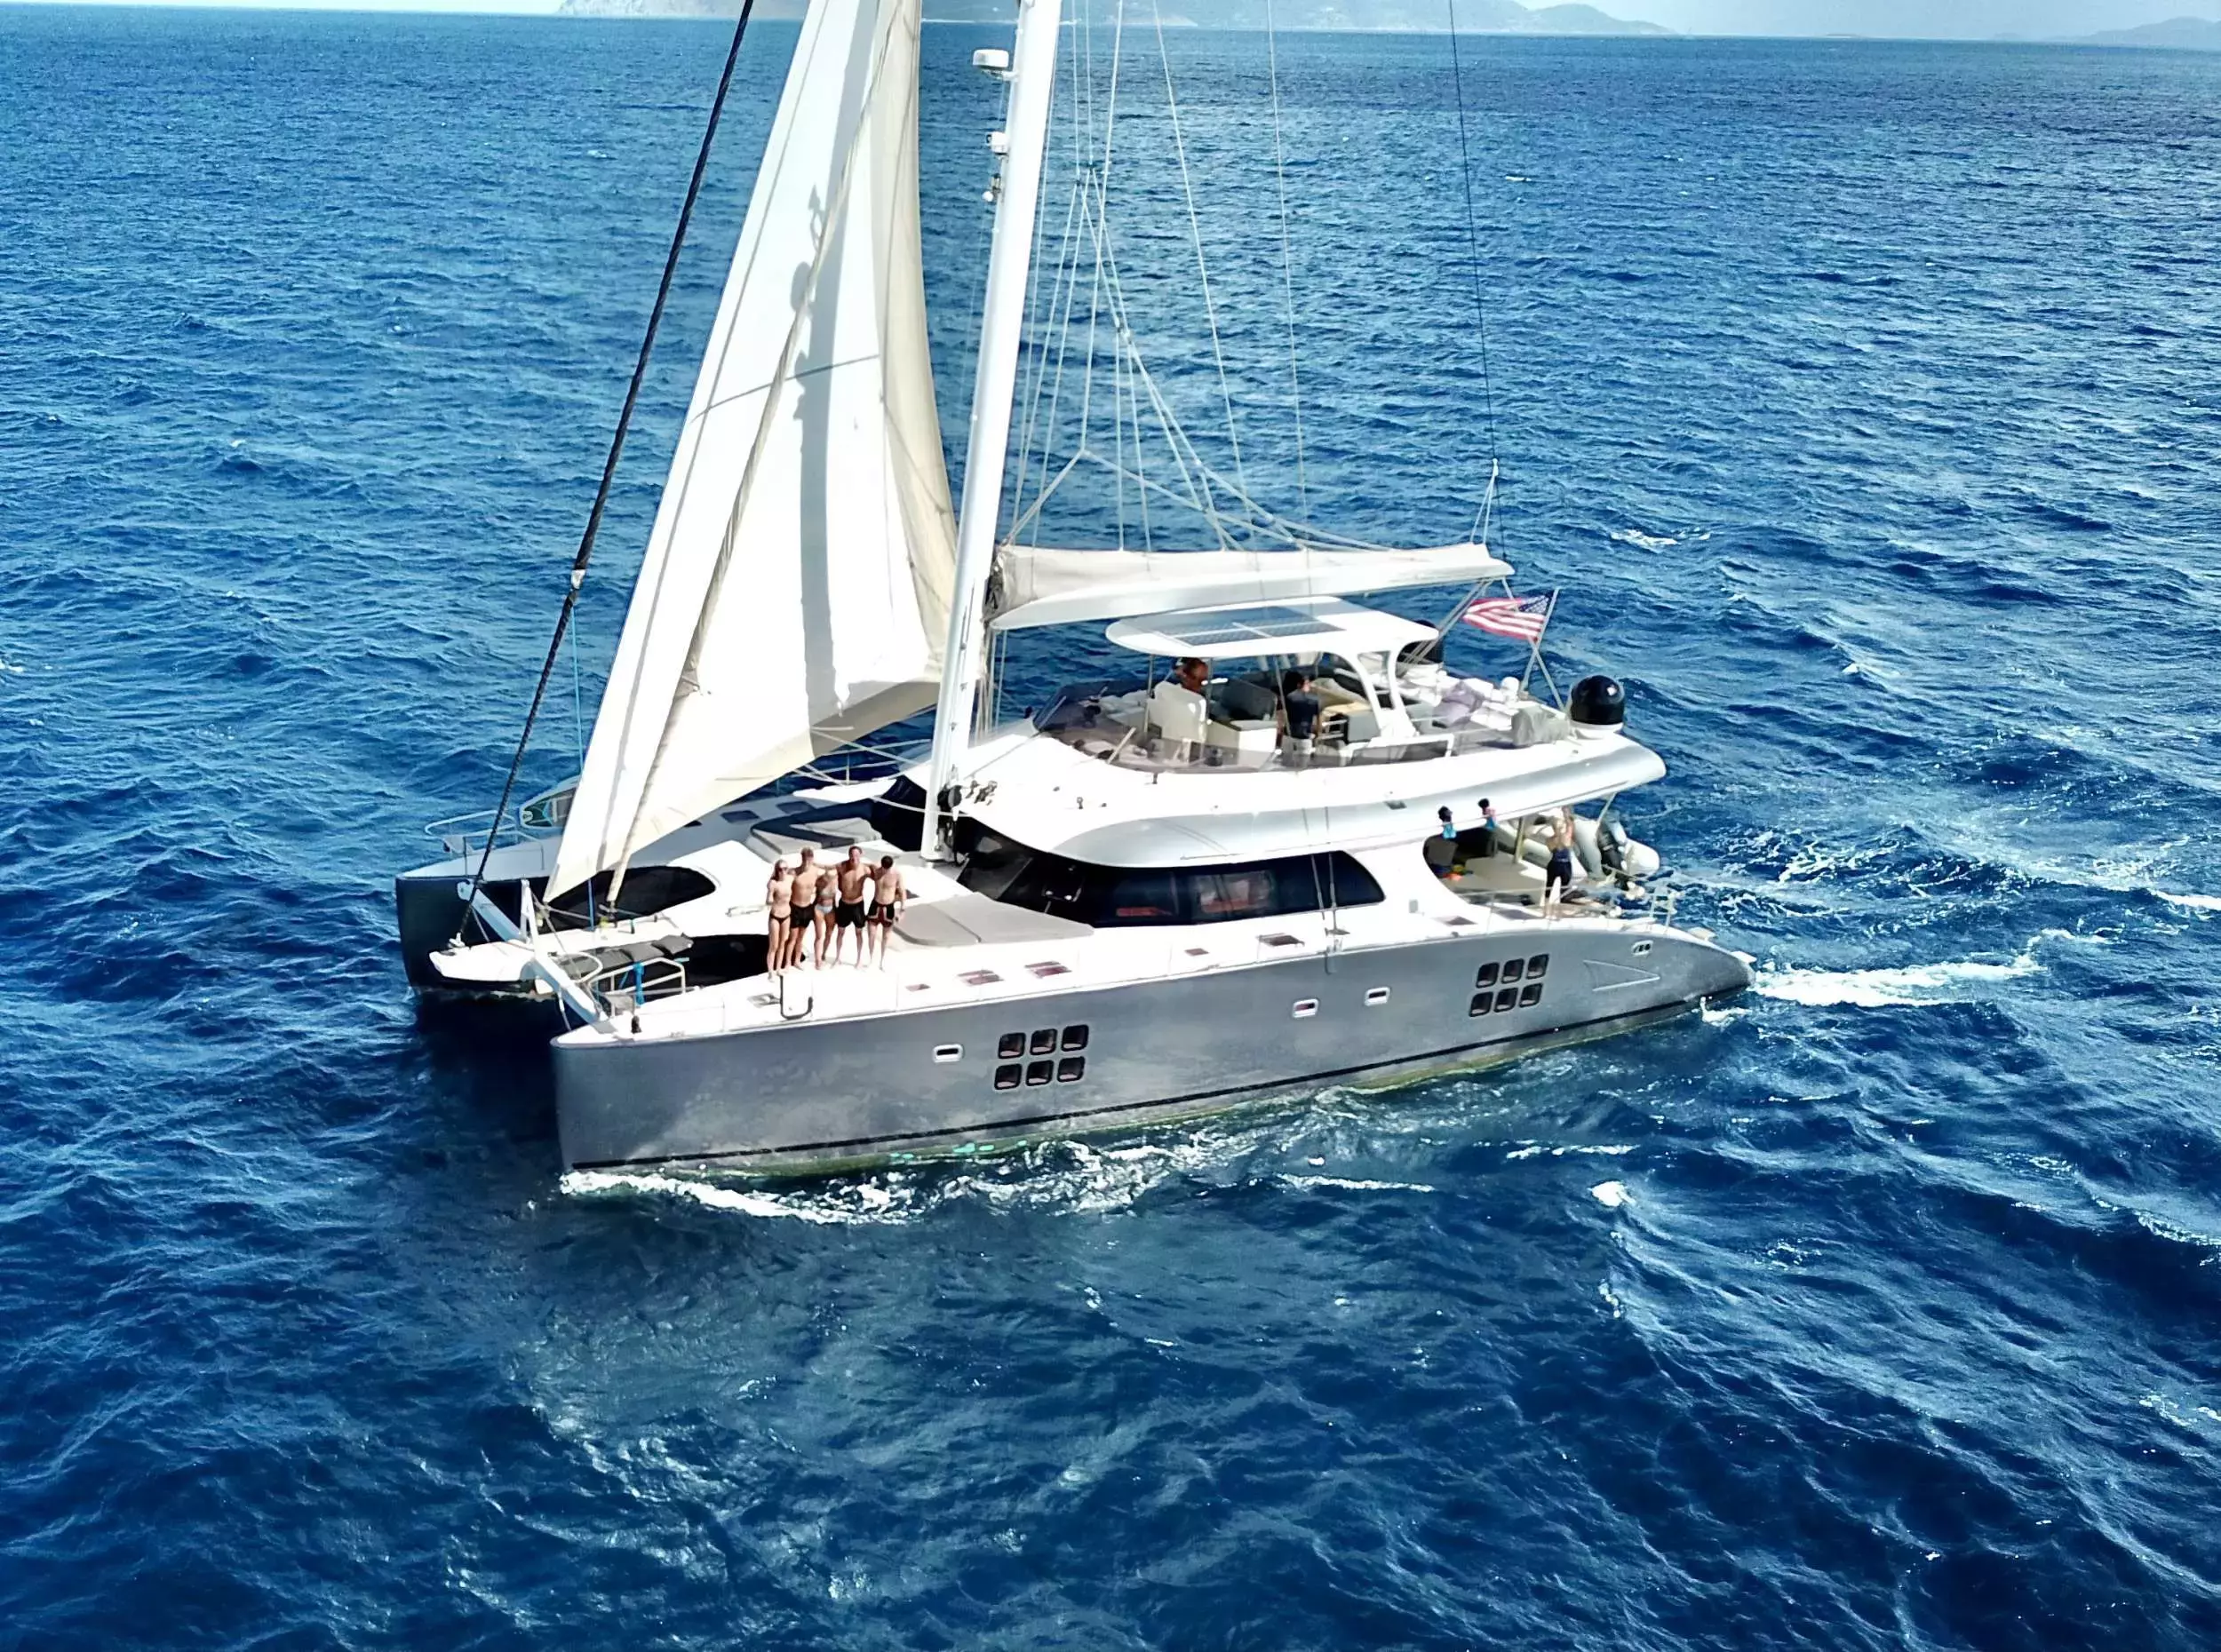 Excess by Sunreef Yachts - Top rates for a Rental of a private Luxury Catamaran in British Virgin Islands